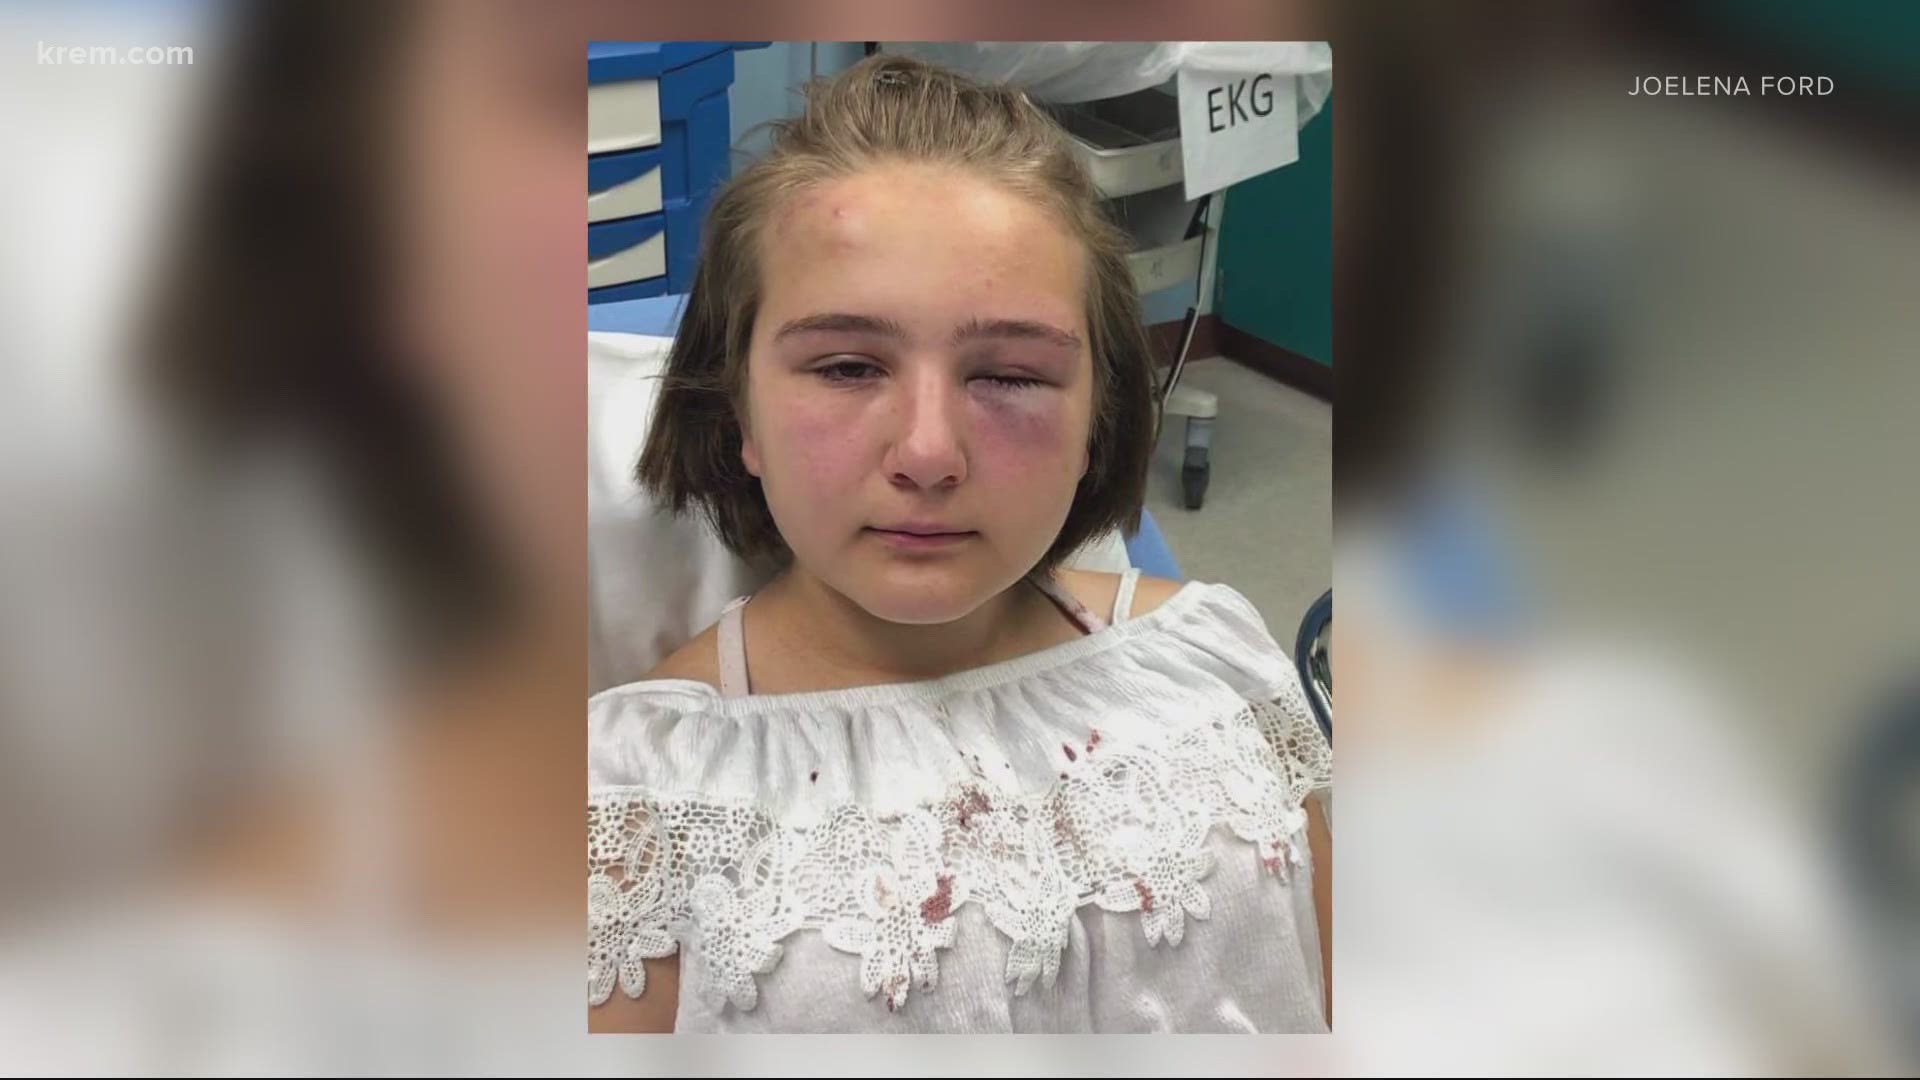 A viral Facebook post shows the victim, a teenage girl, with a swollen eye and bruises on her cheeks.